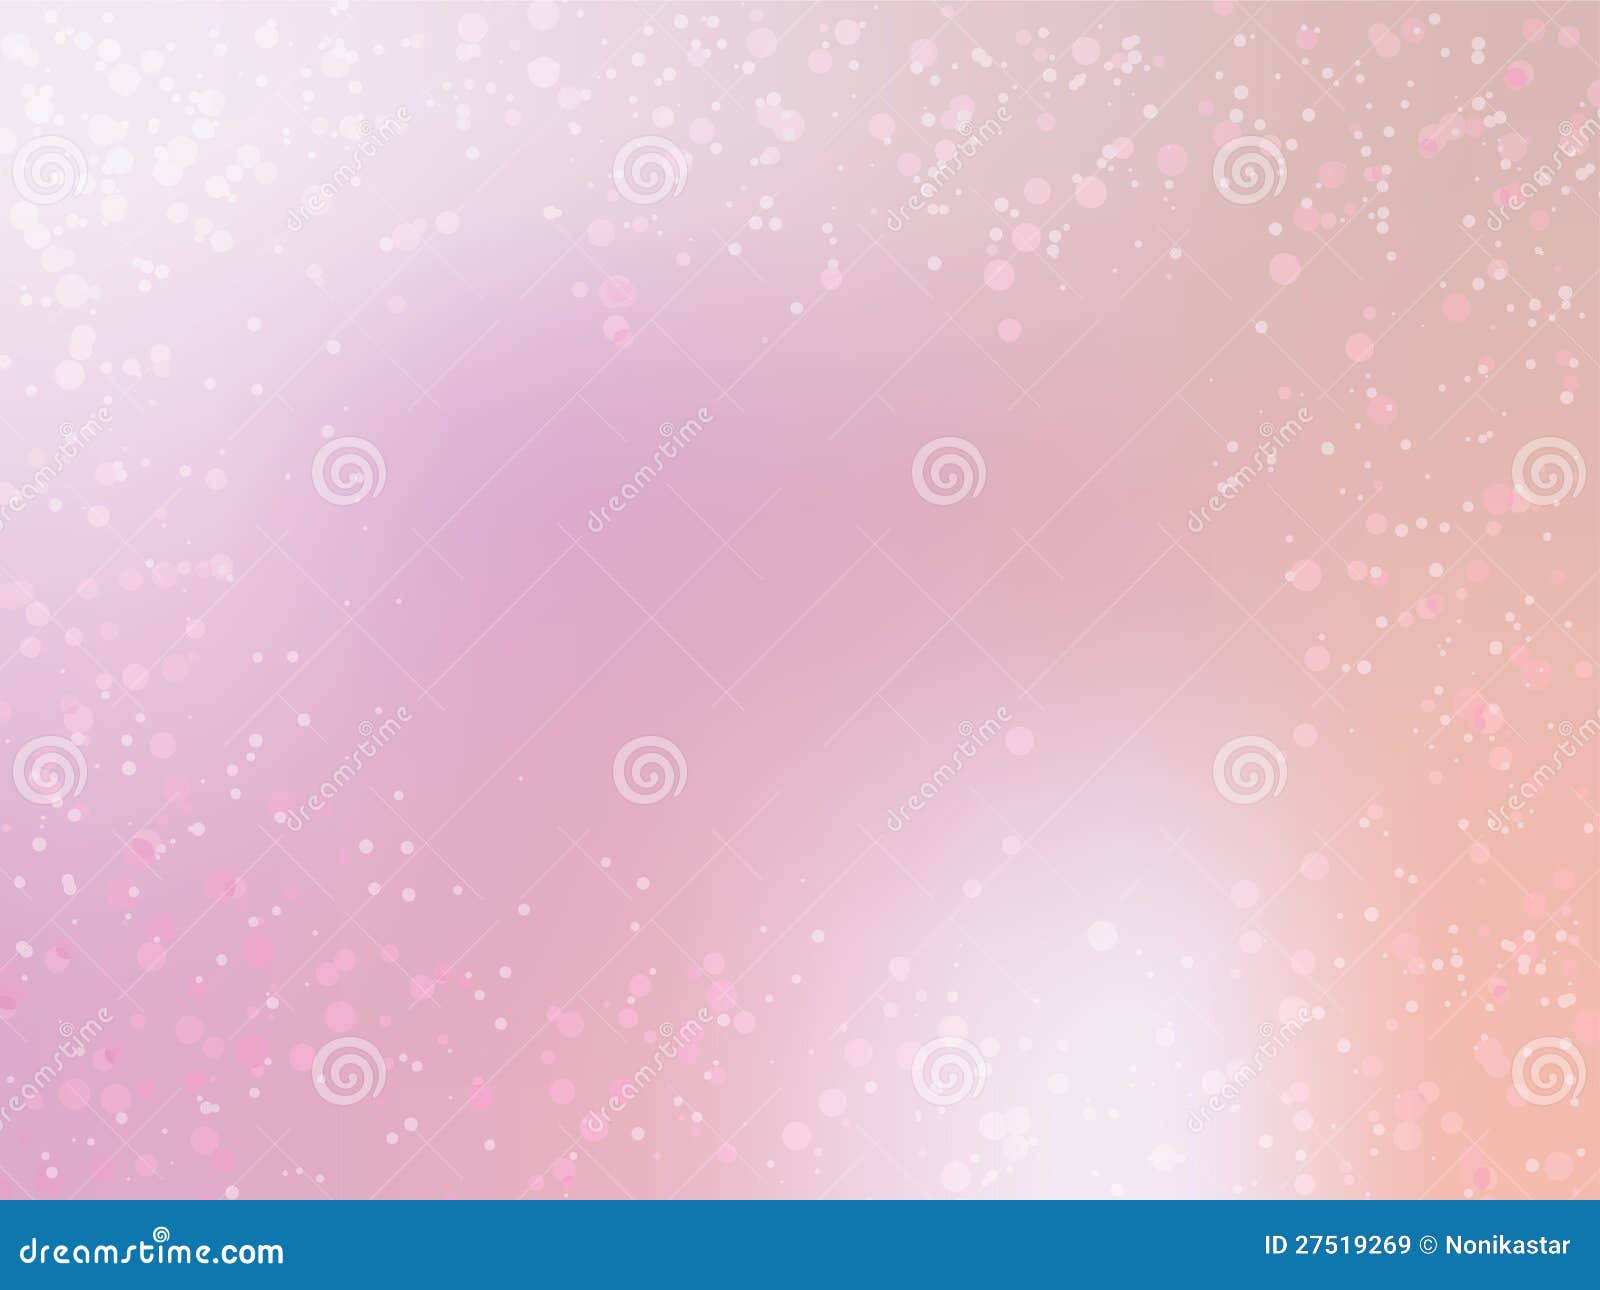 Pink Pastel Abstract Background Royalty Free Stock Images - Image: 27519269